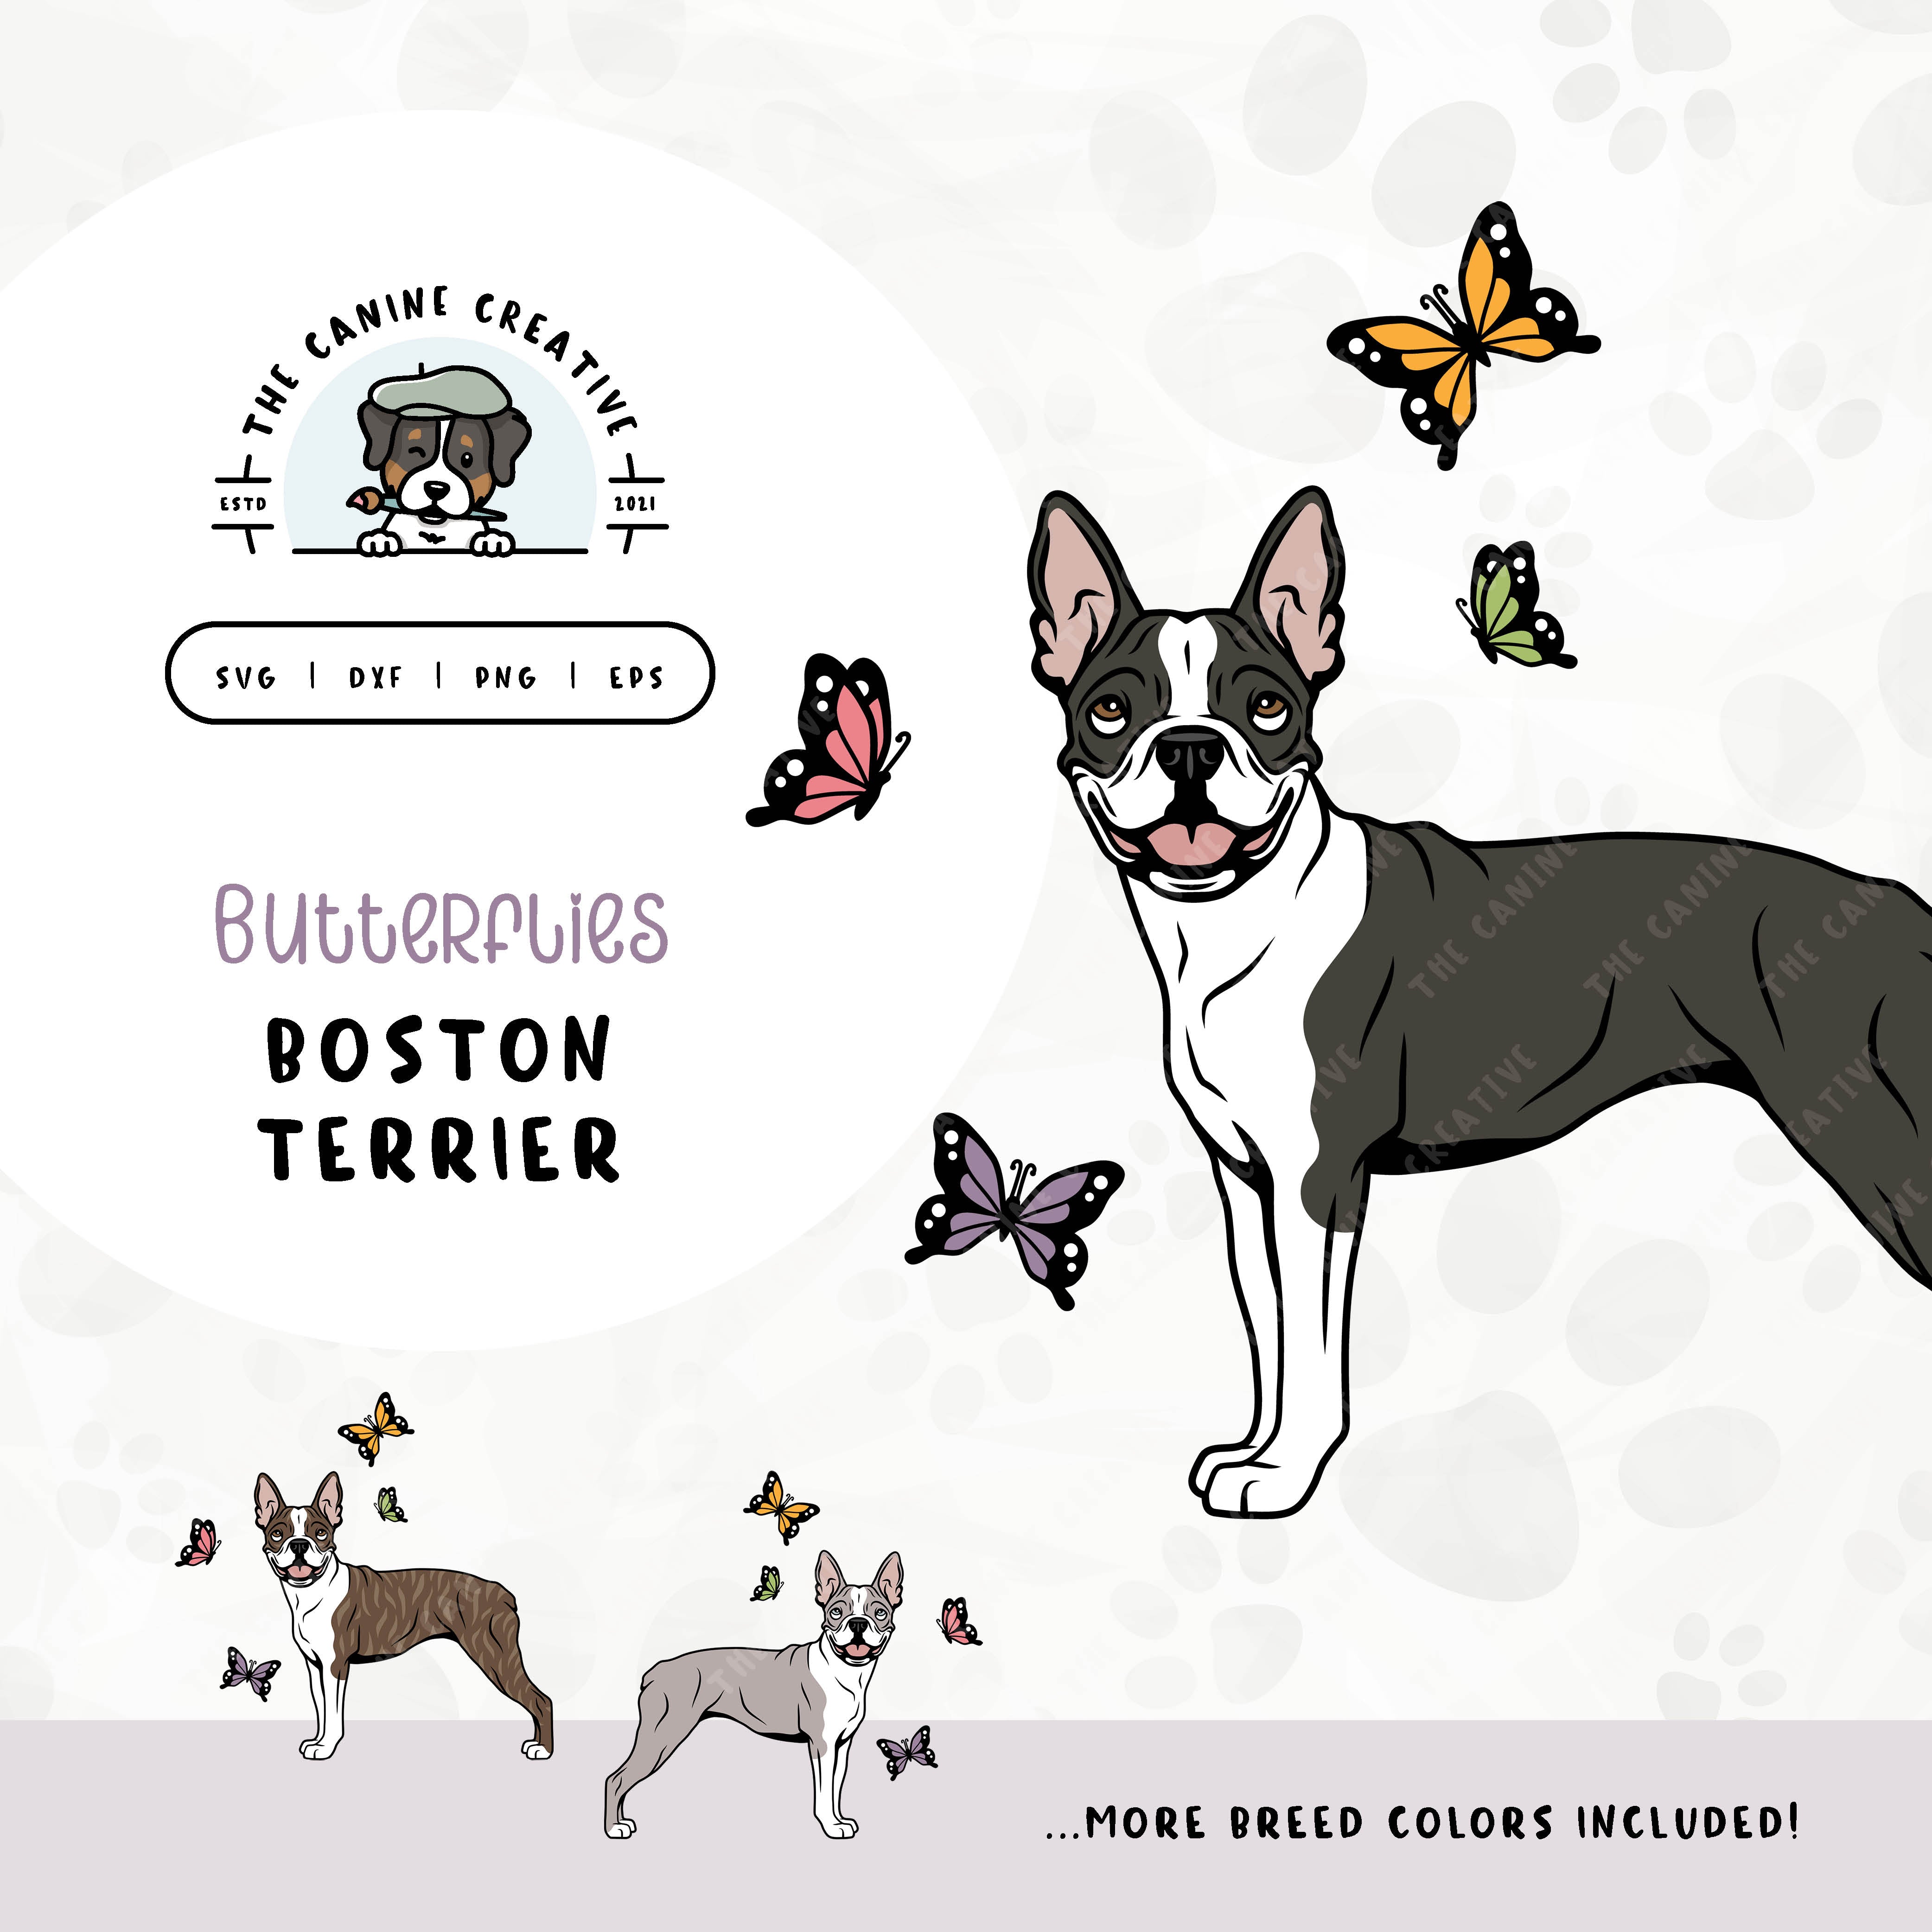 This springtime illustration features a Boston Terrier among colorful butterflies. File formats include: SVG, DXF, PNG, and EPS.